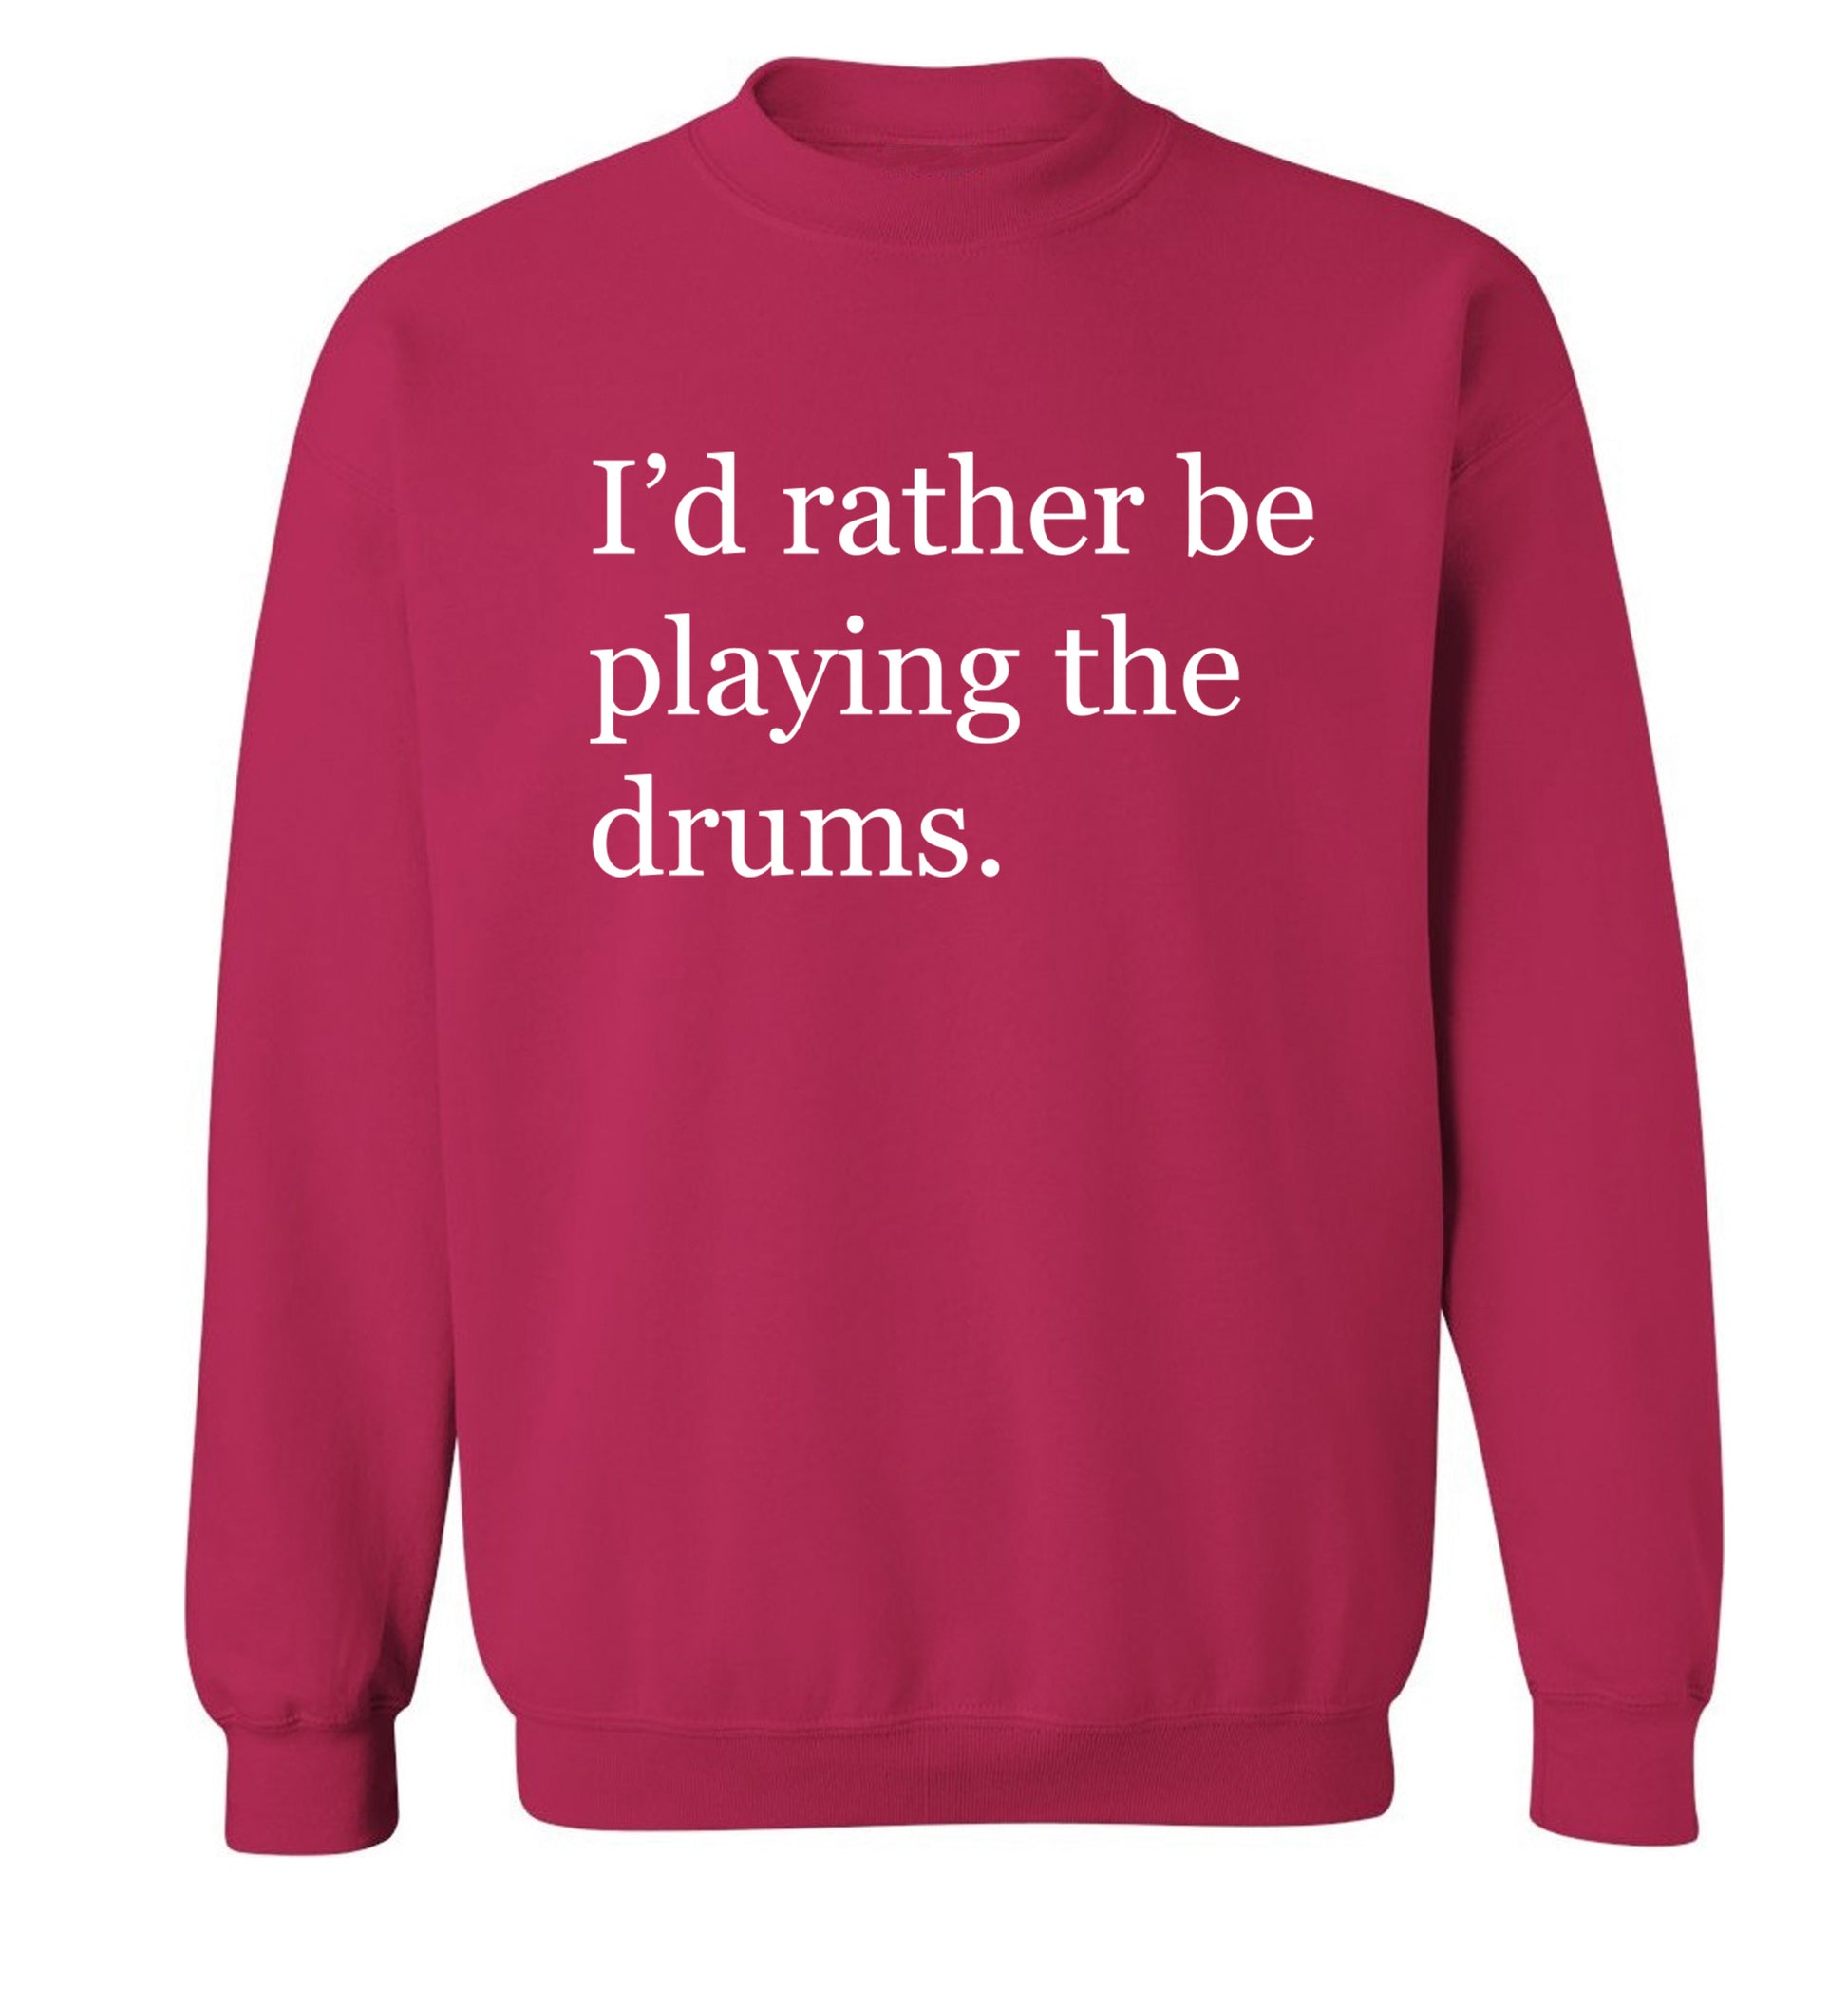 I'd rather be playing the drums Adult's unisexpink Sweater 2XL